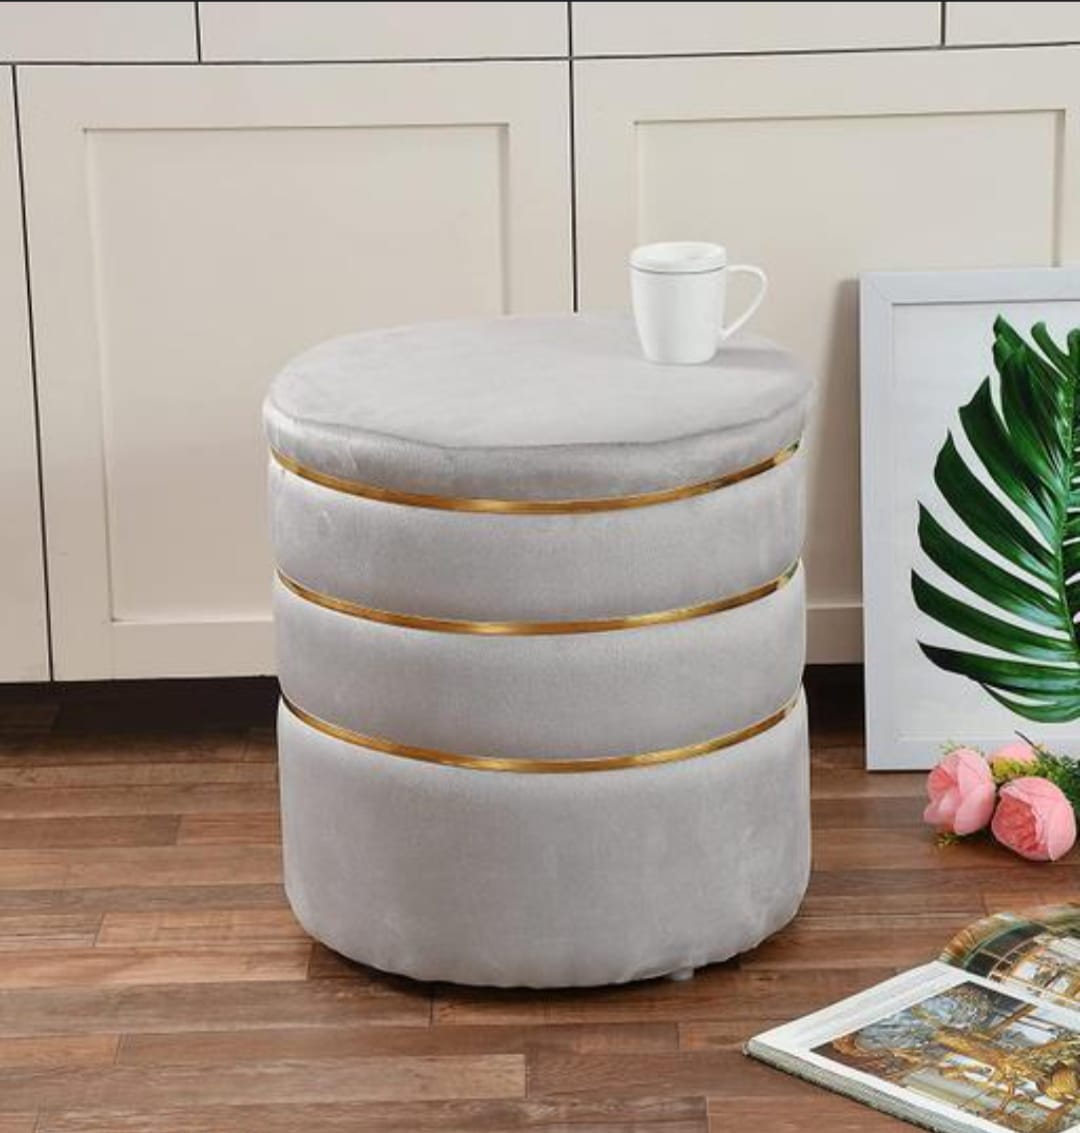 Kashyapa Rugs Collection - Presents Pouffes Stool for Living Room Sitting Furniture Wooden Velvet Puffy Stool Footrest Footstool Pouf for Home Decor, Dressing Table Stool(Multicolor) (Grey) pack of 1 pic